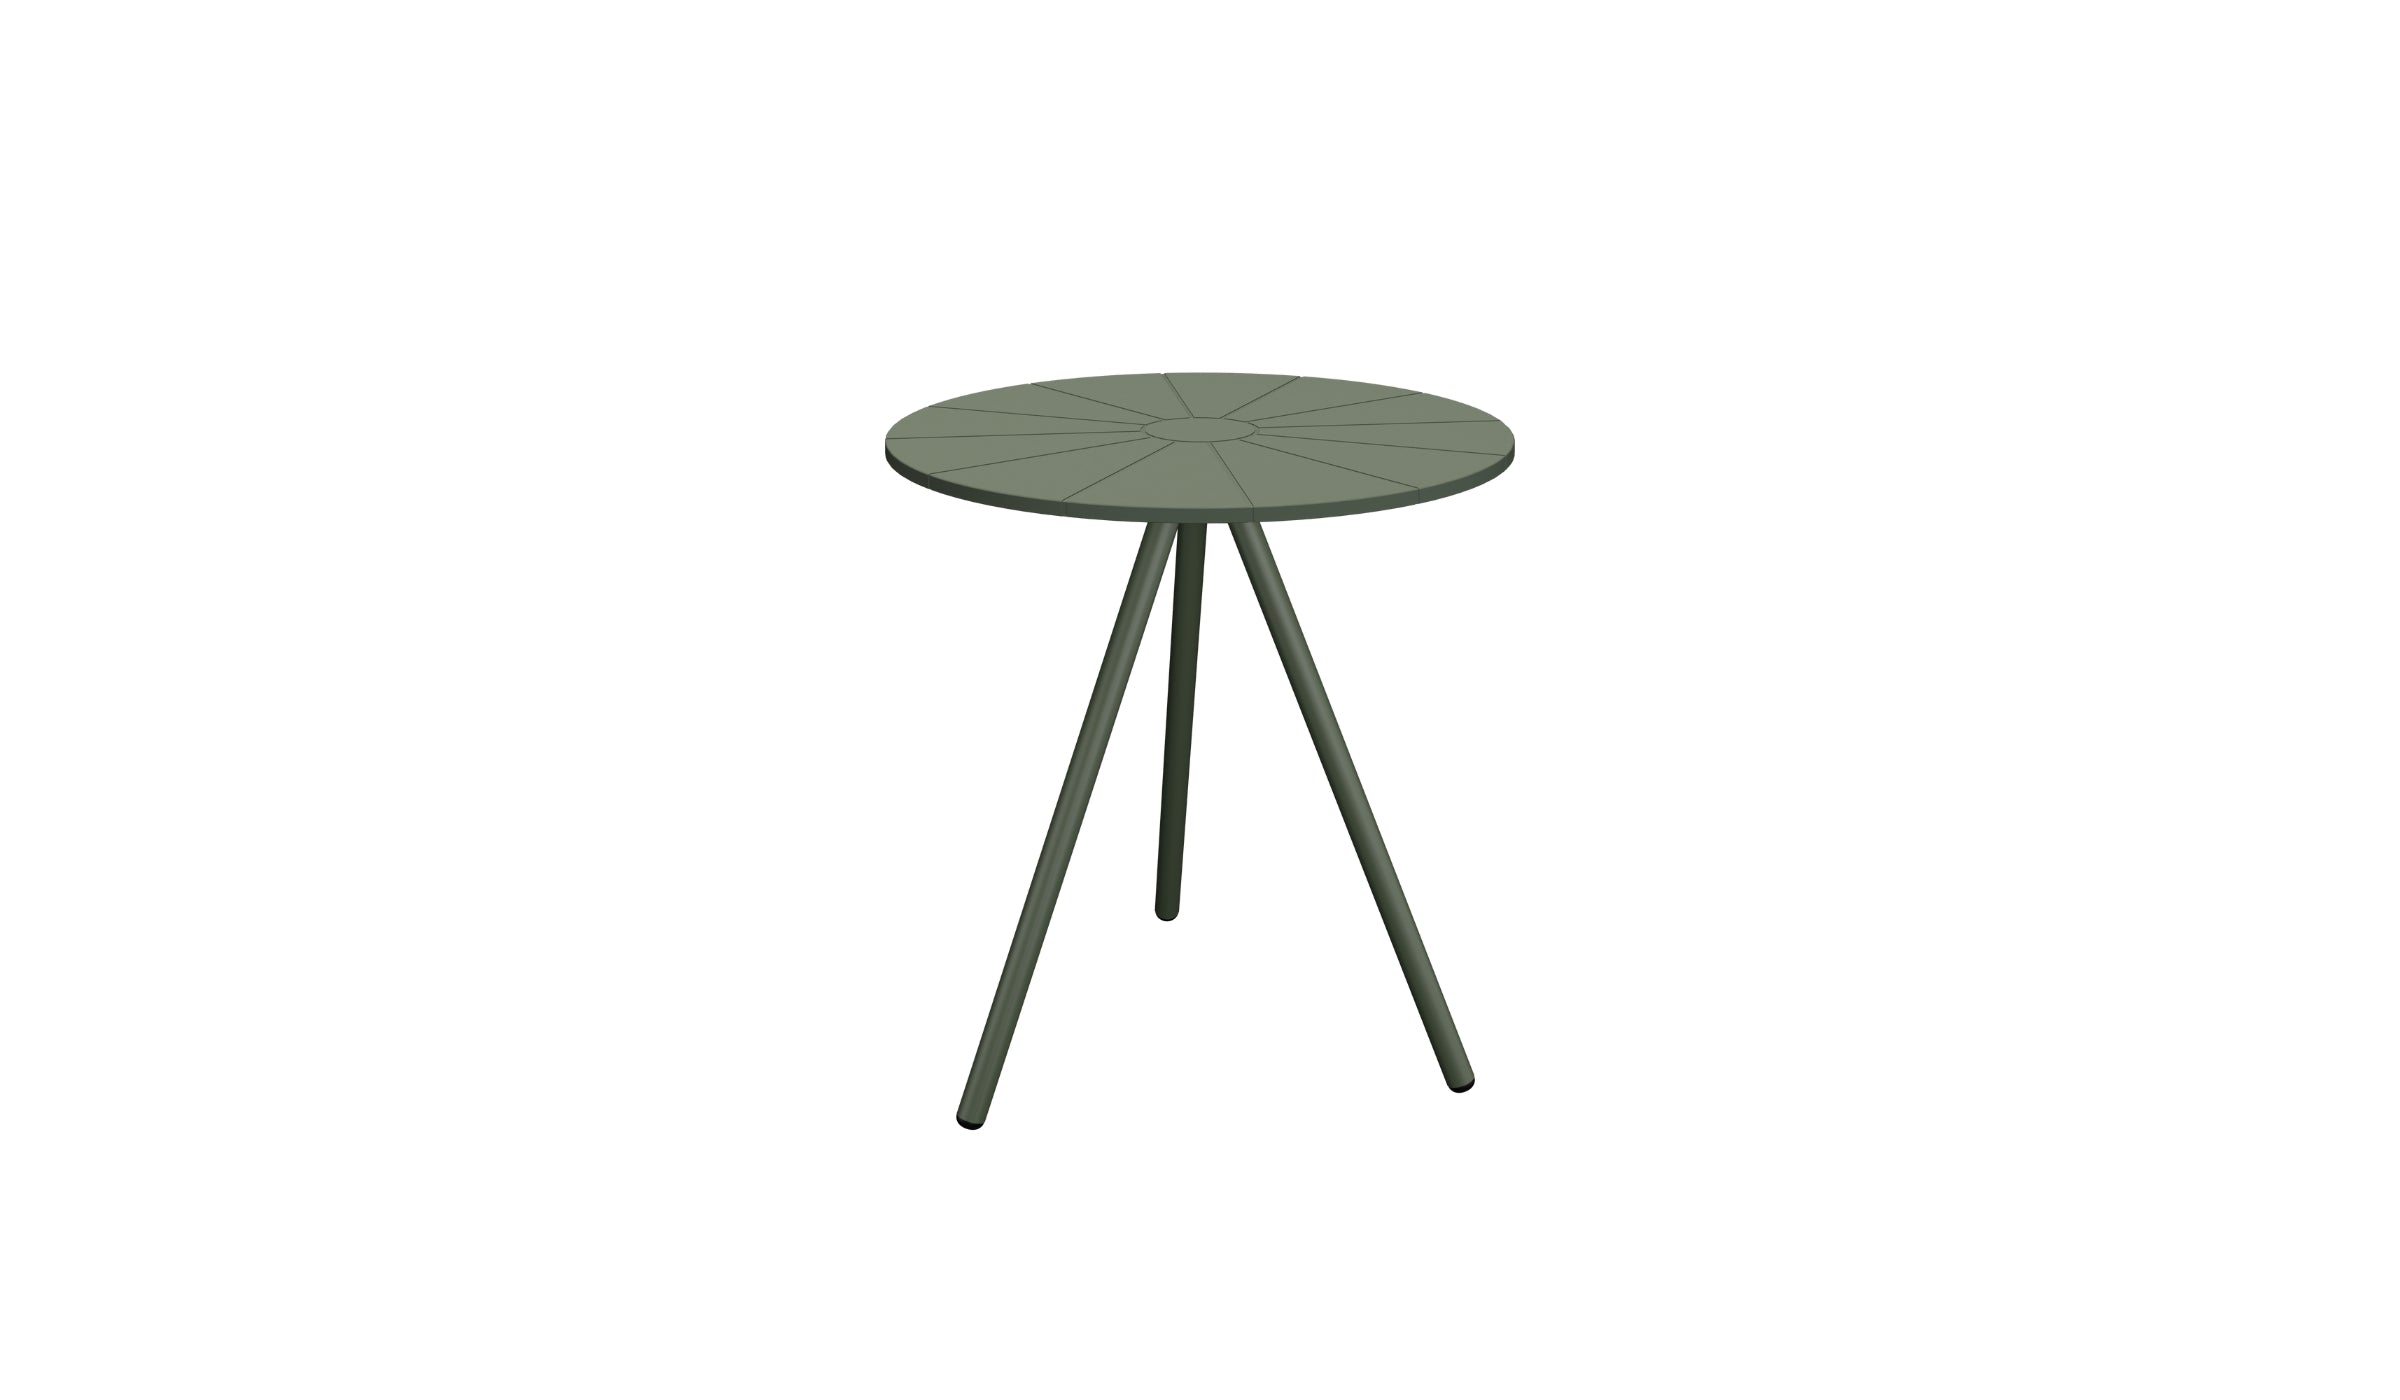 Nami - Designer outdoor dining table in recycled plastic, green